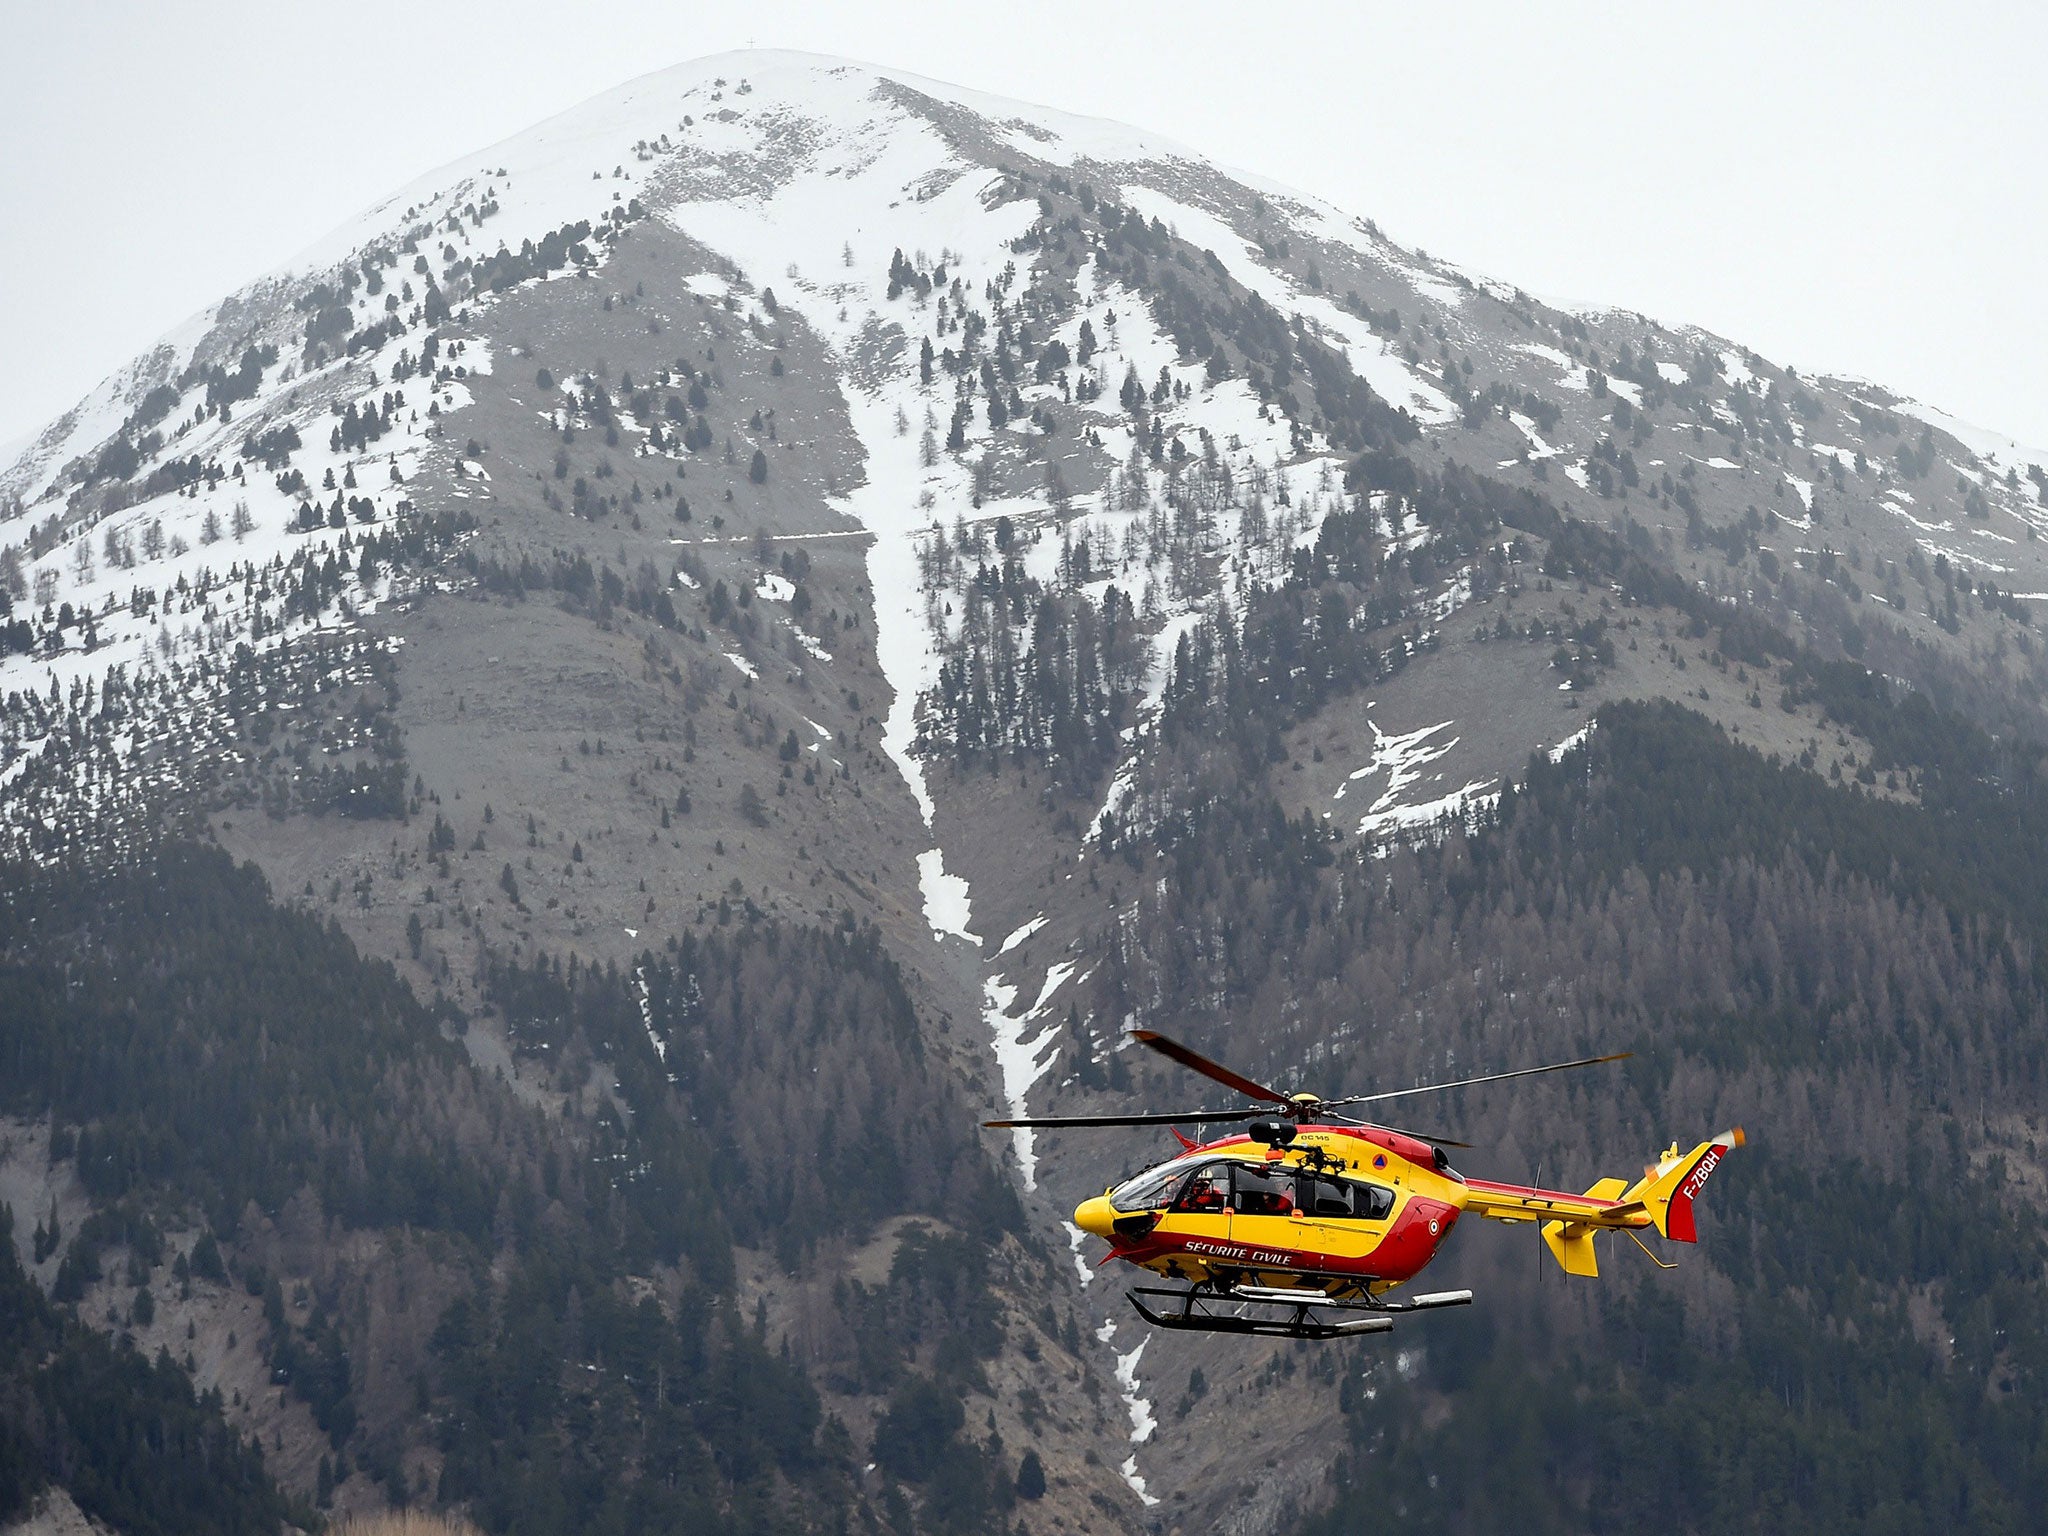 An helicopter of civil security services is seen in Seyne, south-eastern France, near the site where a Germanwings Airbus A320 crashed in the French Alps